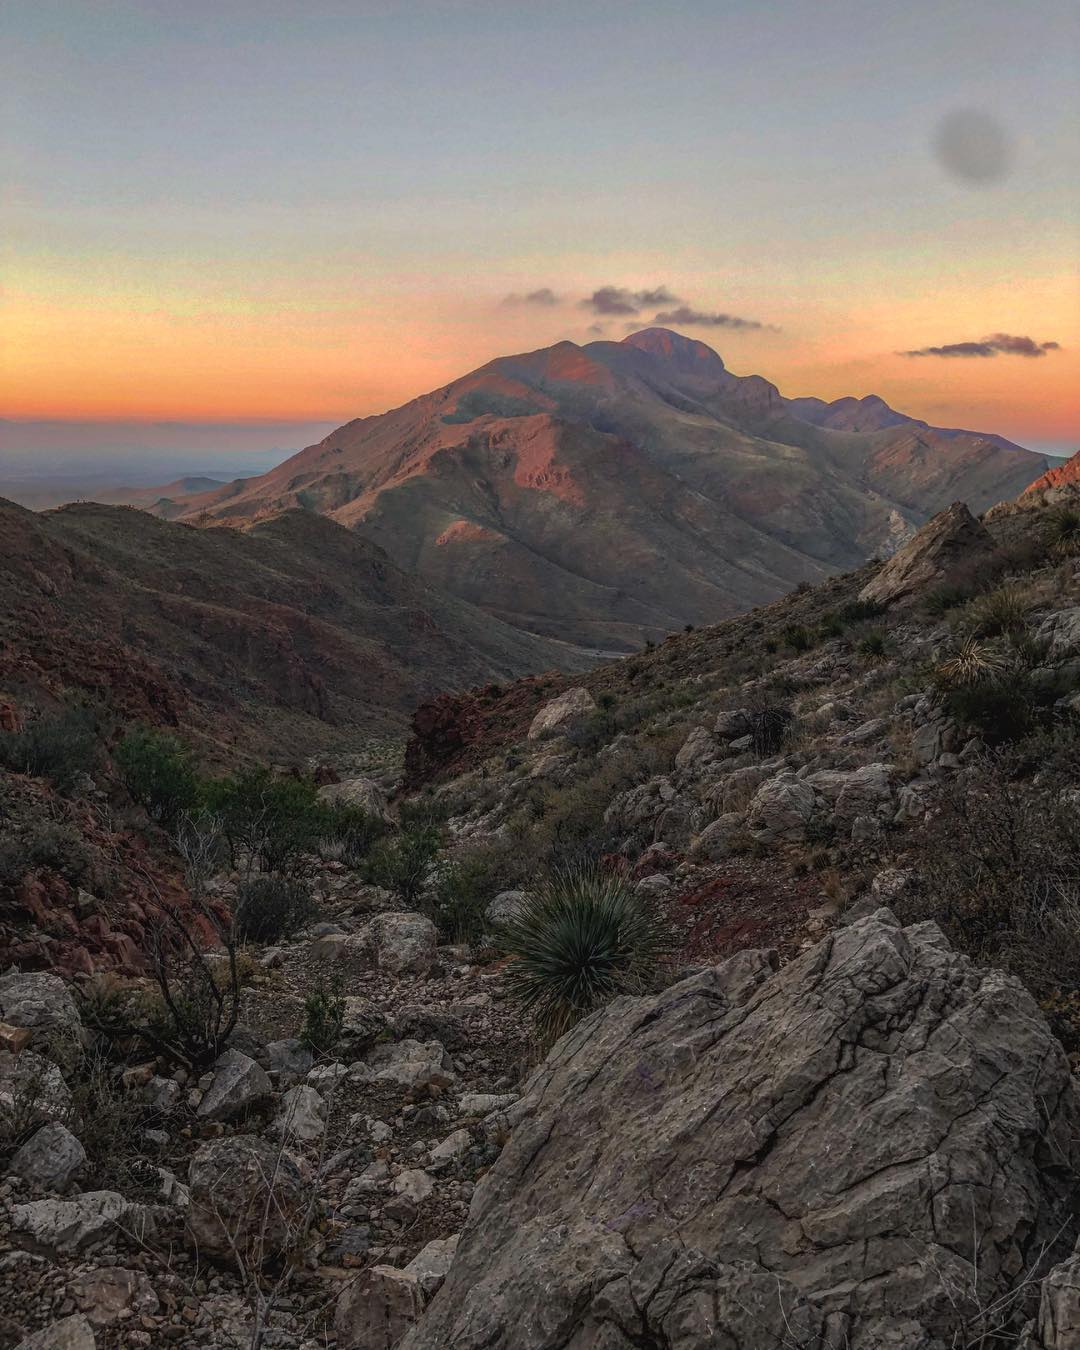 Aerial view of mountains at sunset. Photo by Instagram user @onthe1edge